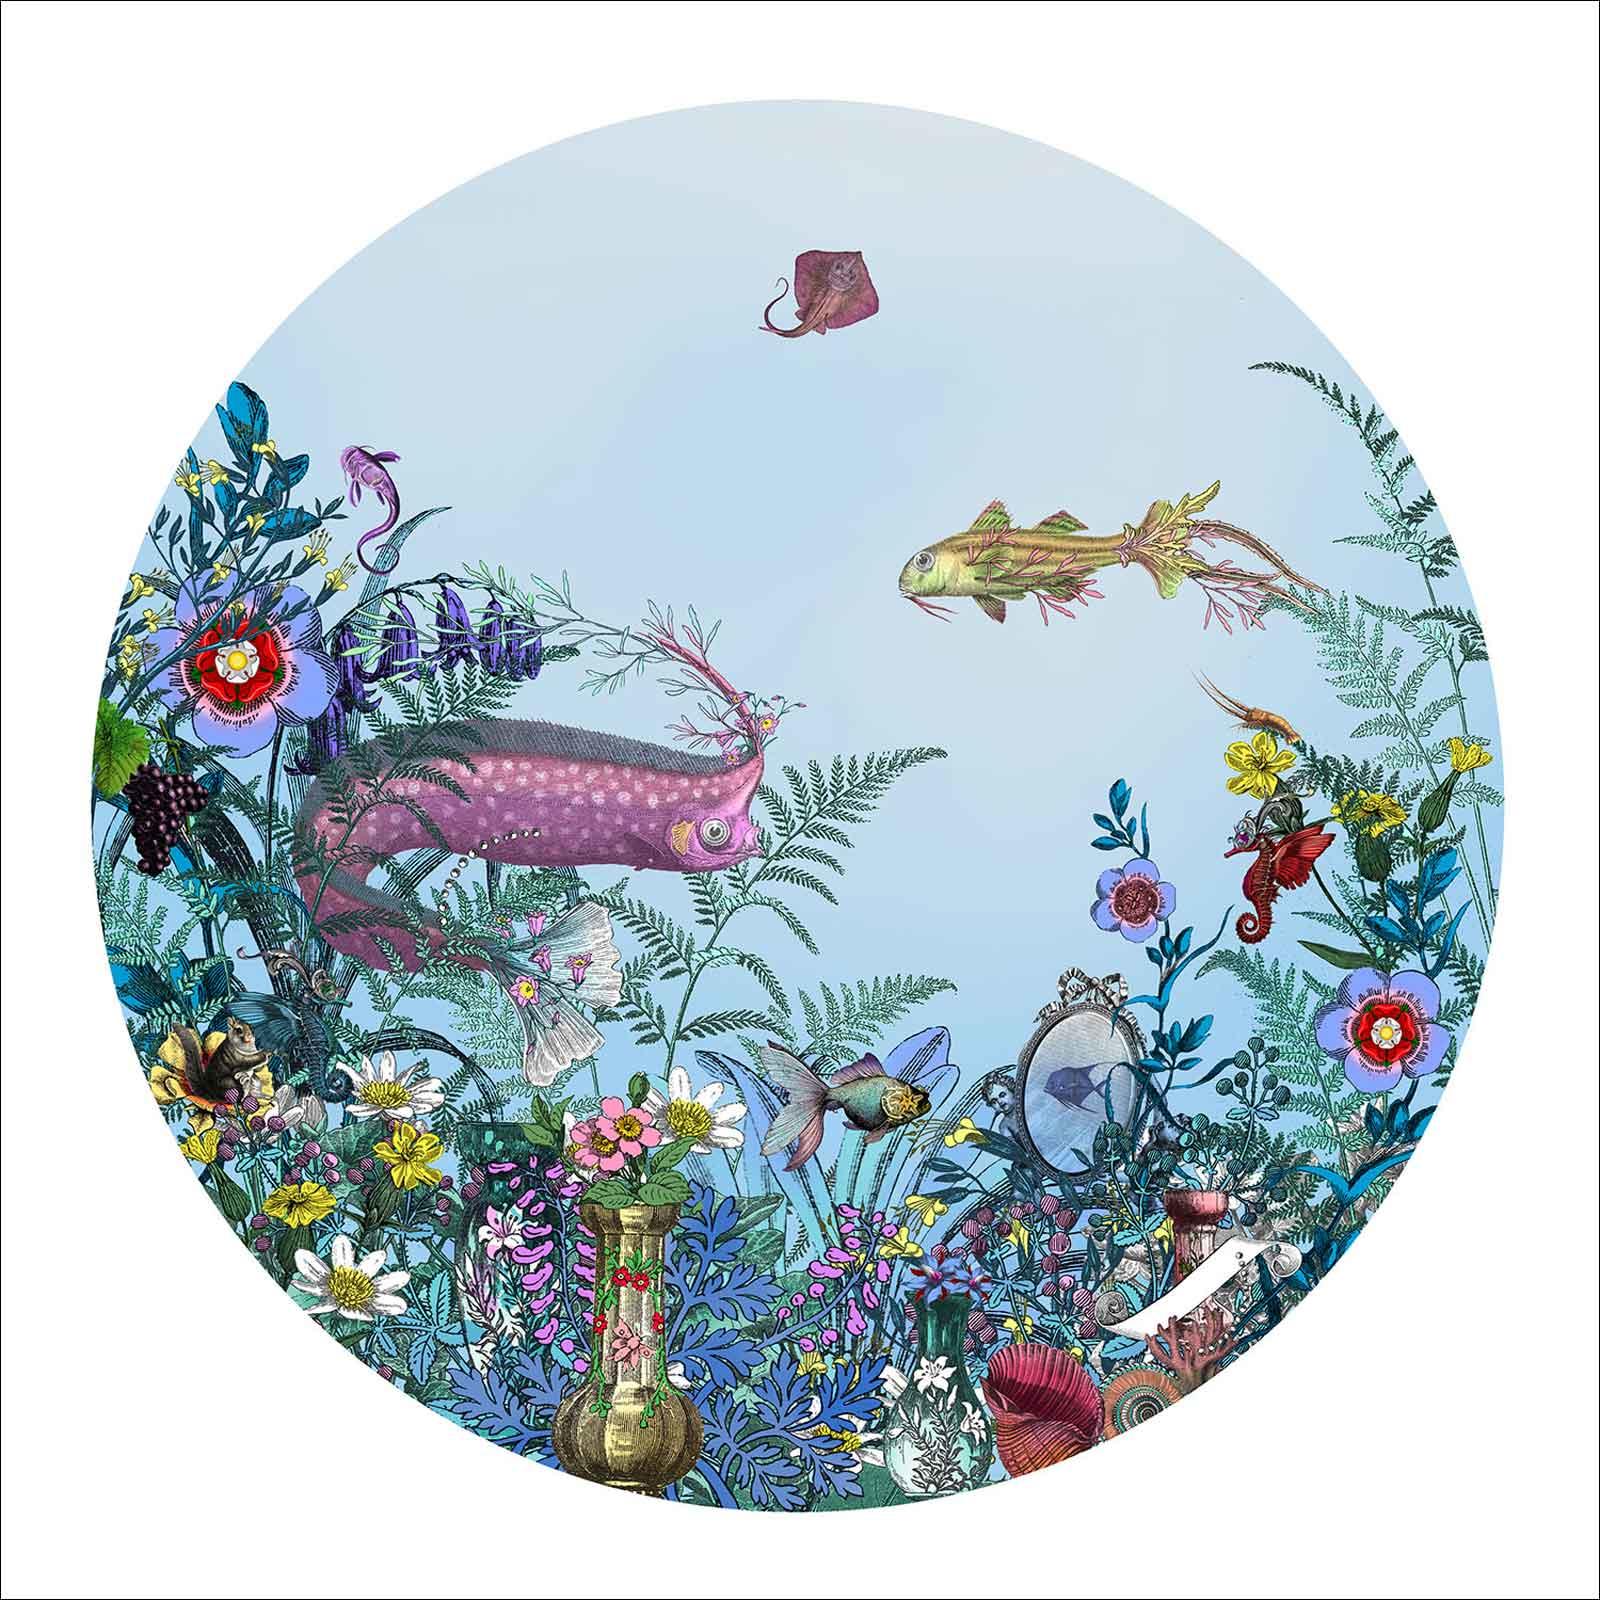 A limited edition art print of a pink swimming fish will bring life to your wall.